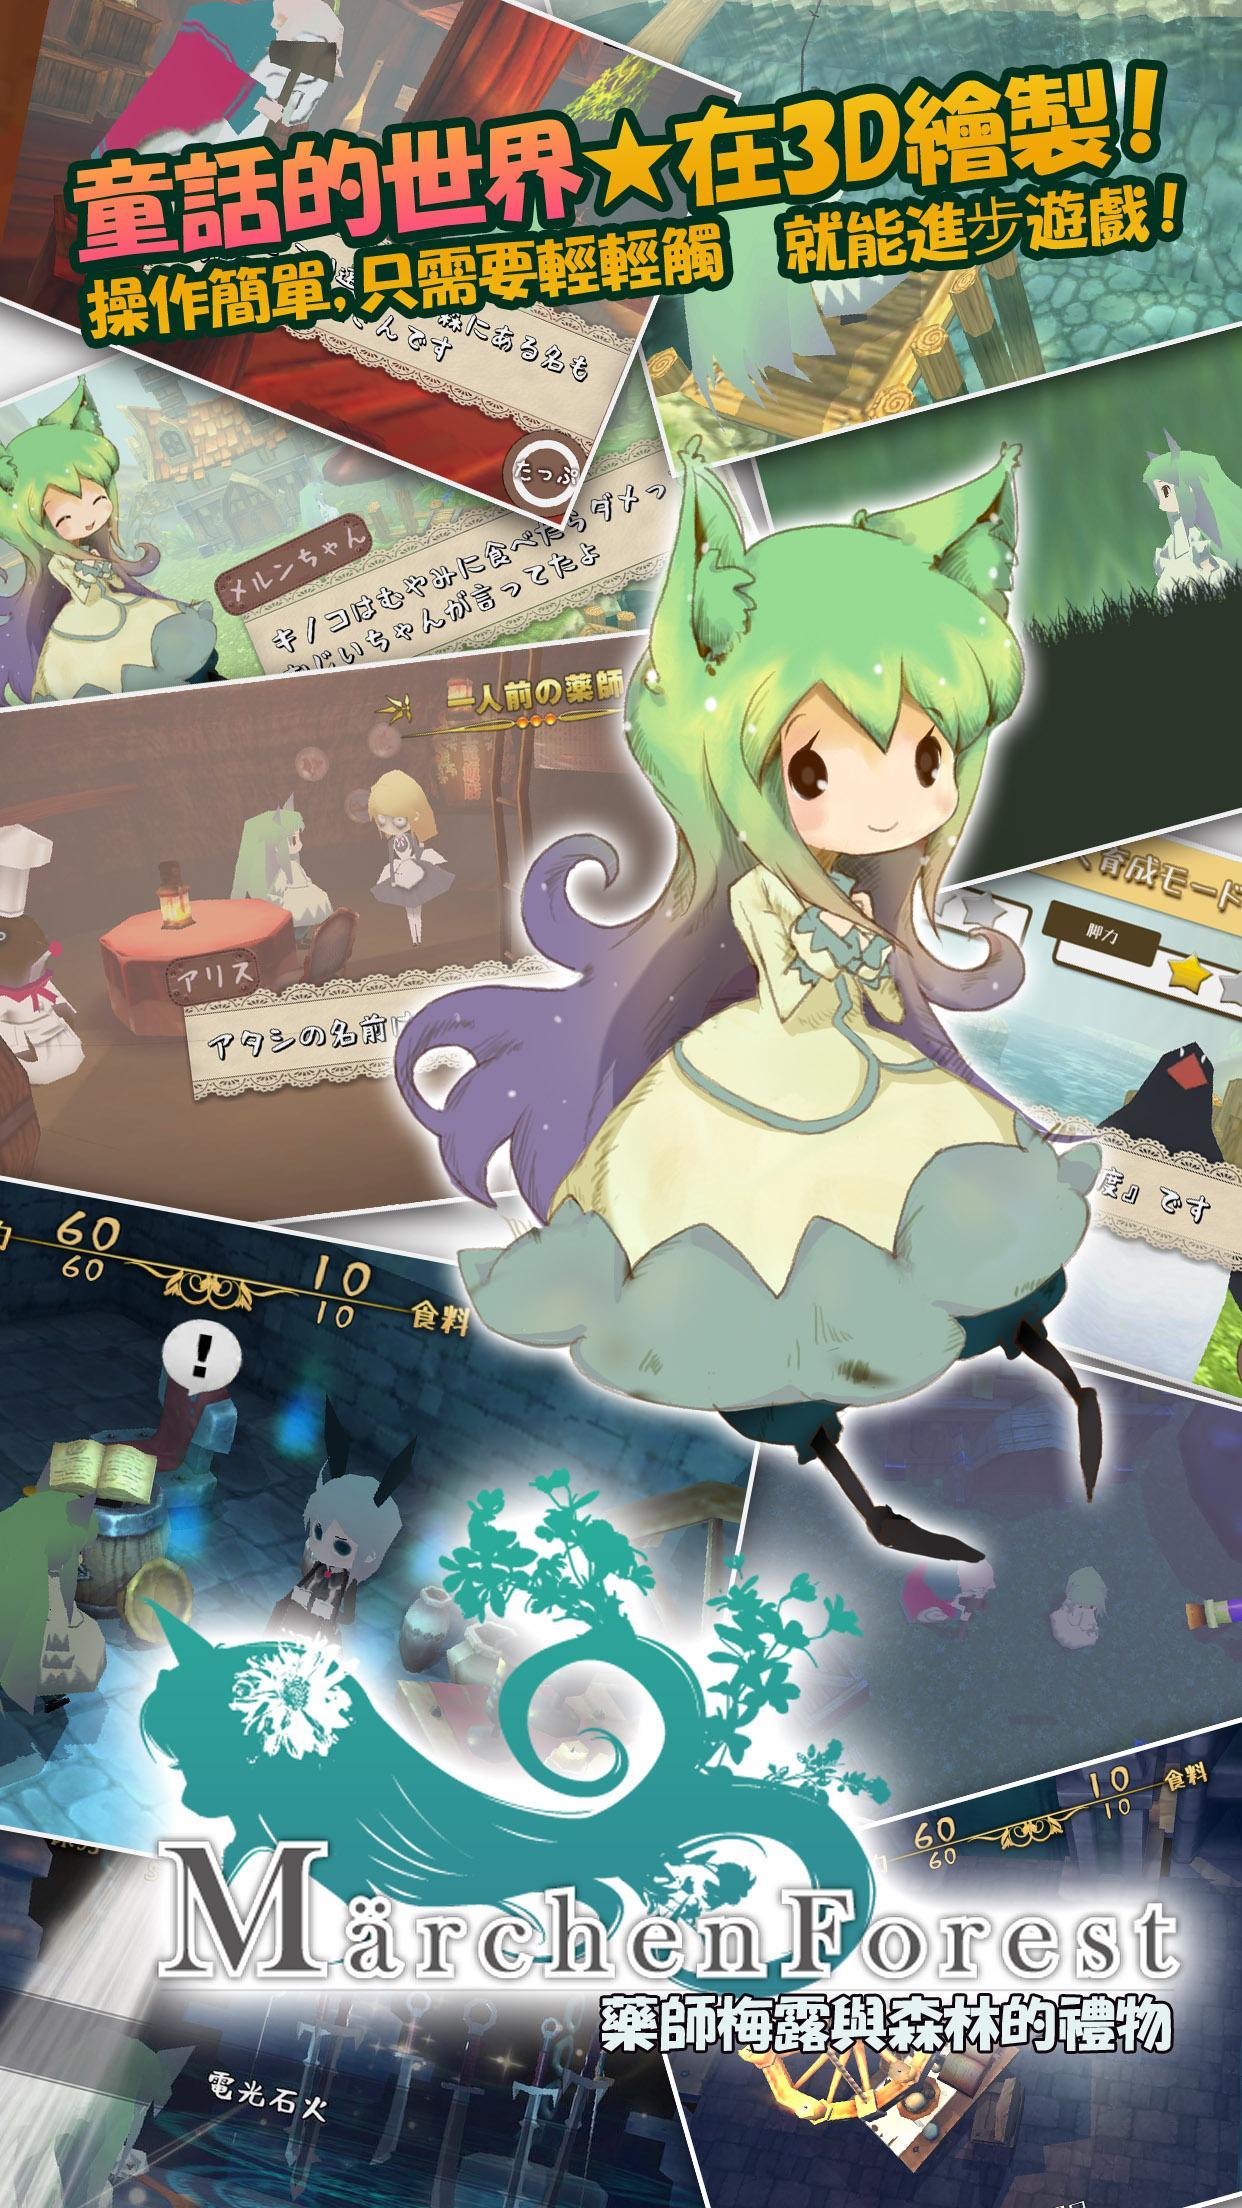 Screenshot 1 of Märchen Forest ~Merun-chan and the Gift of the Forest~ 3.0.1